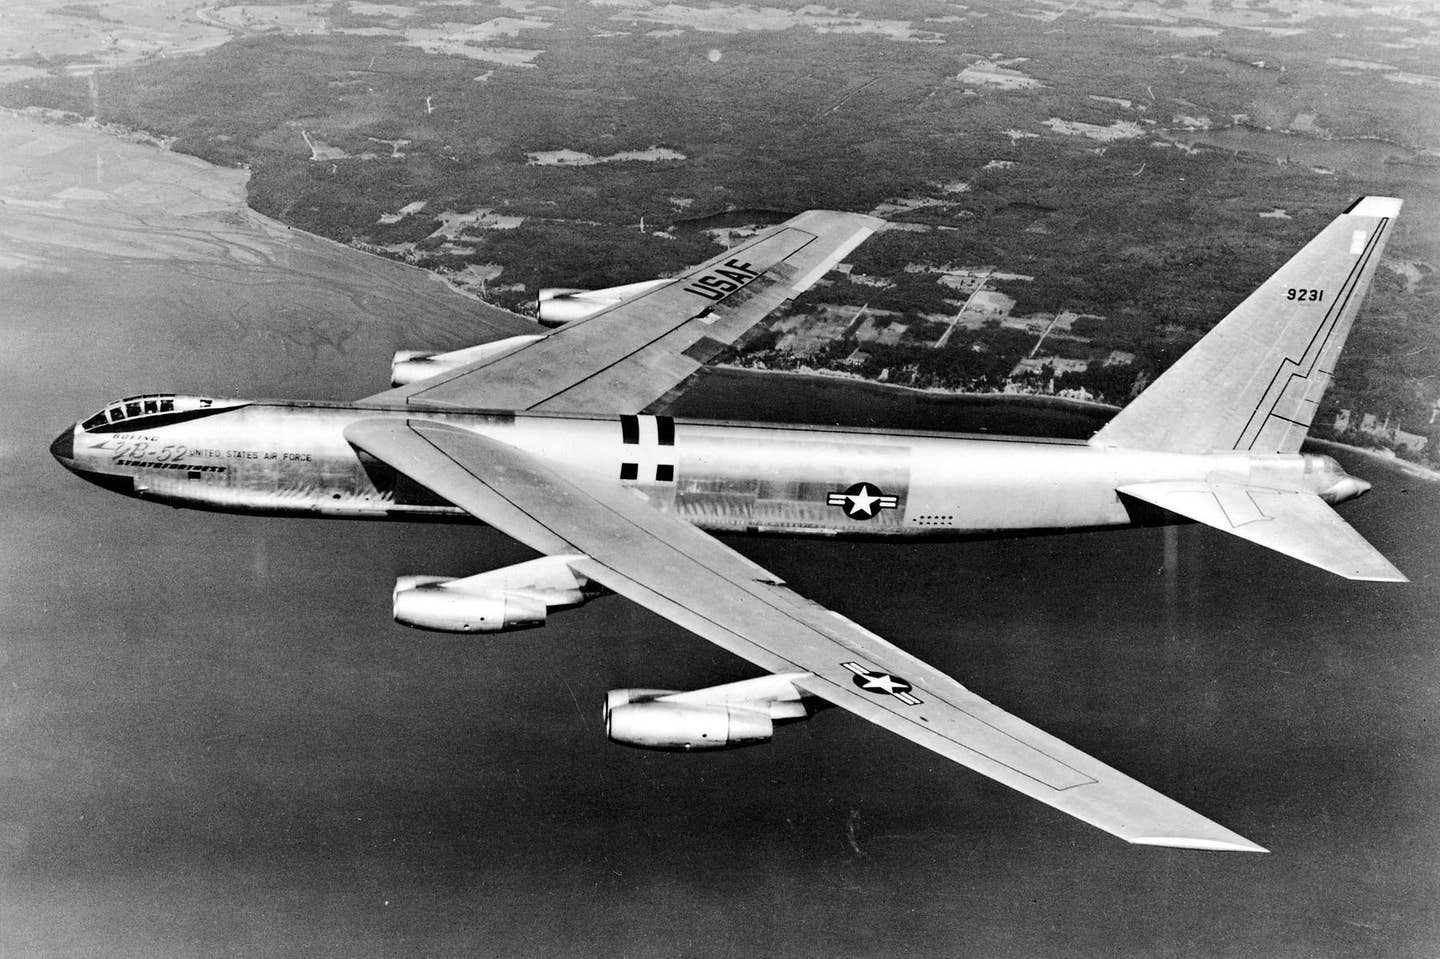 Boeing YB-52 bomber in flight, with a bubble canopy, similar to that of the B-47.